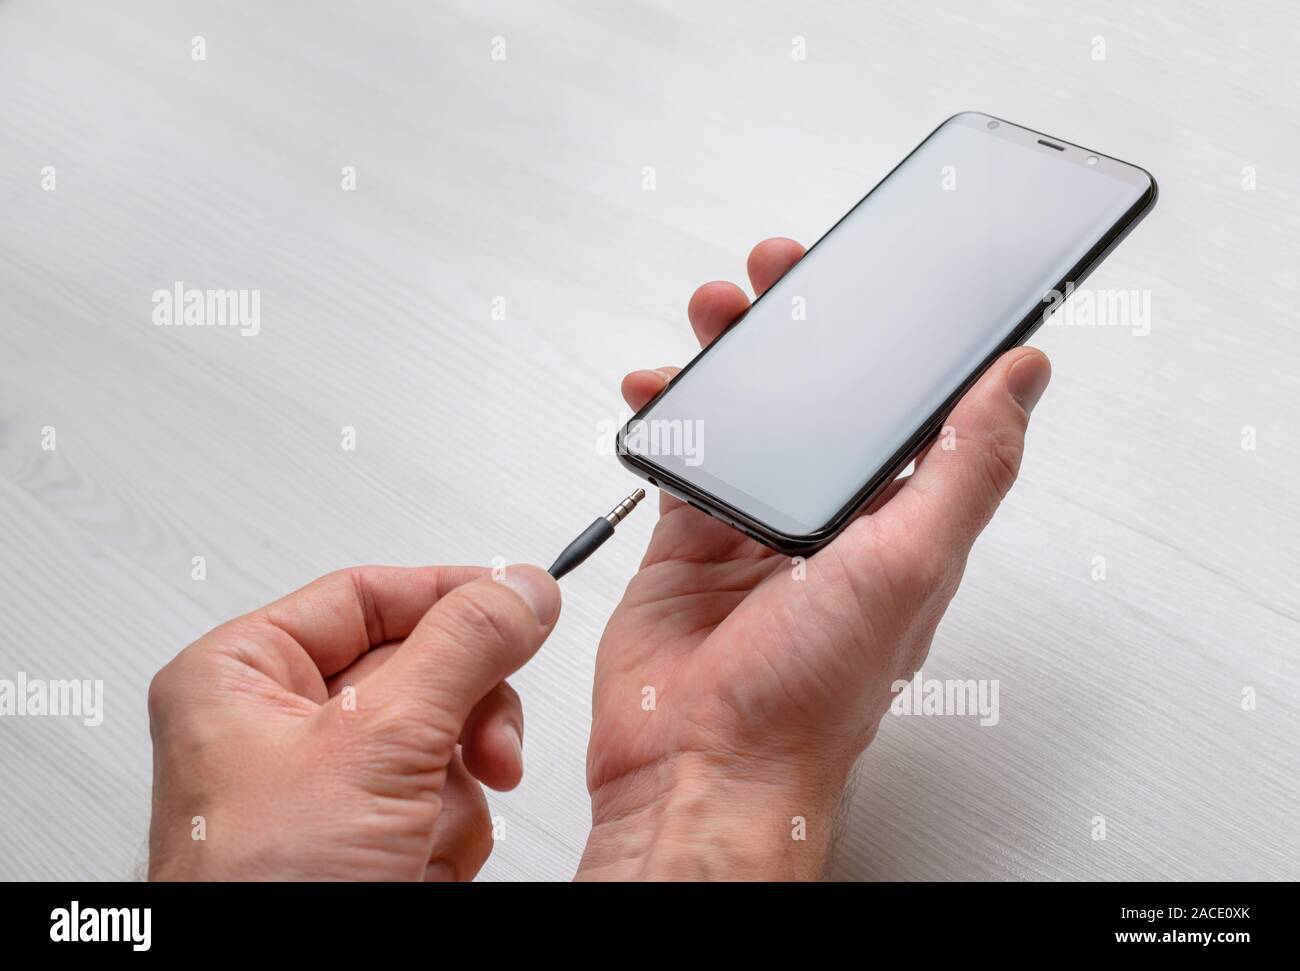 Connecting audio jack on a mobile phone. 3.5 mm audio jack and mobile phone in hands. Stock Photo